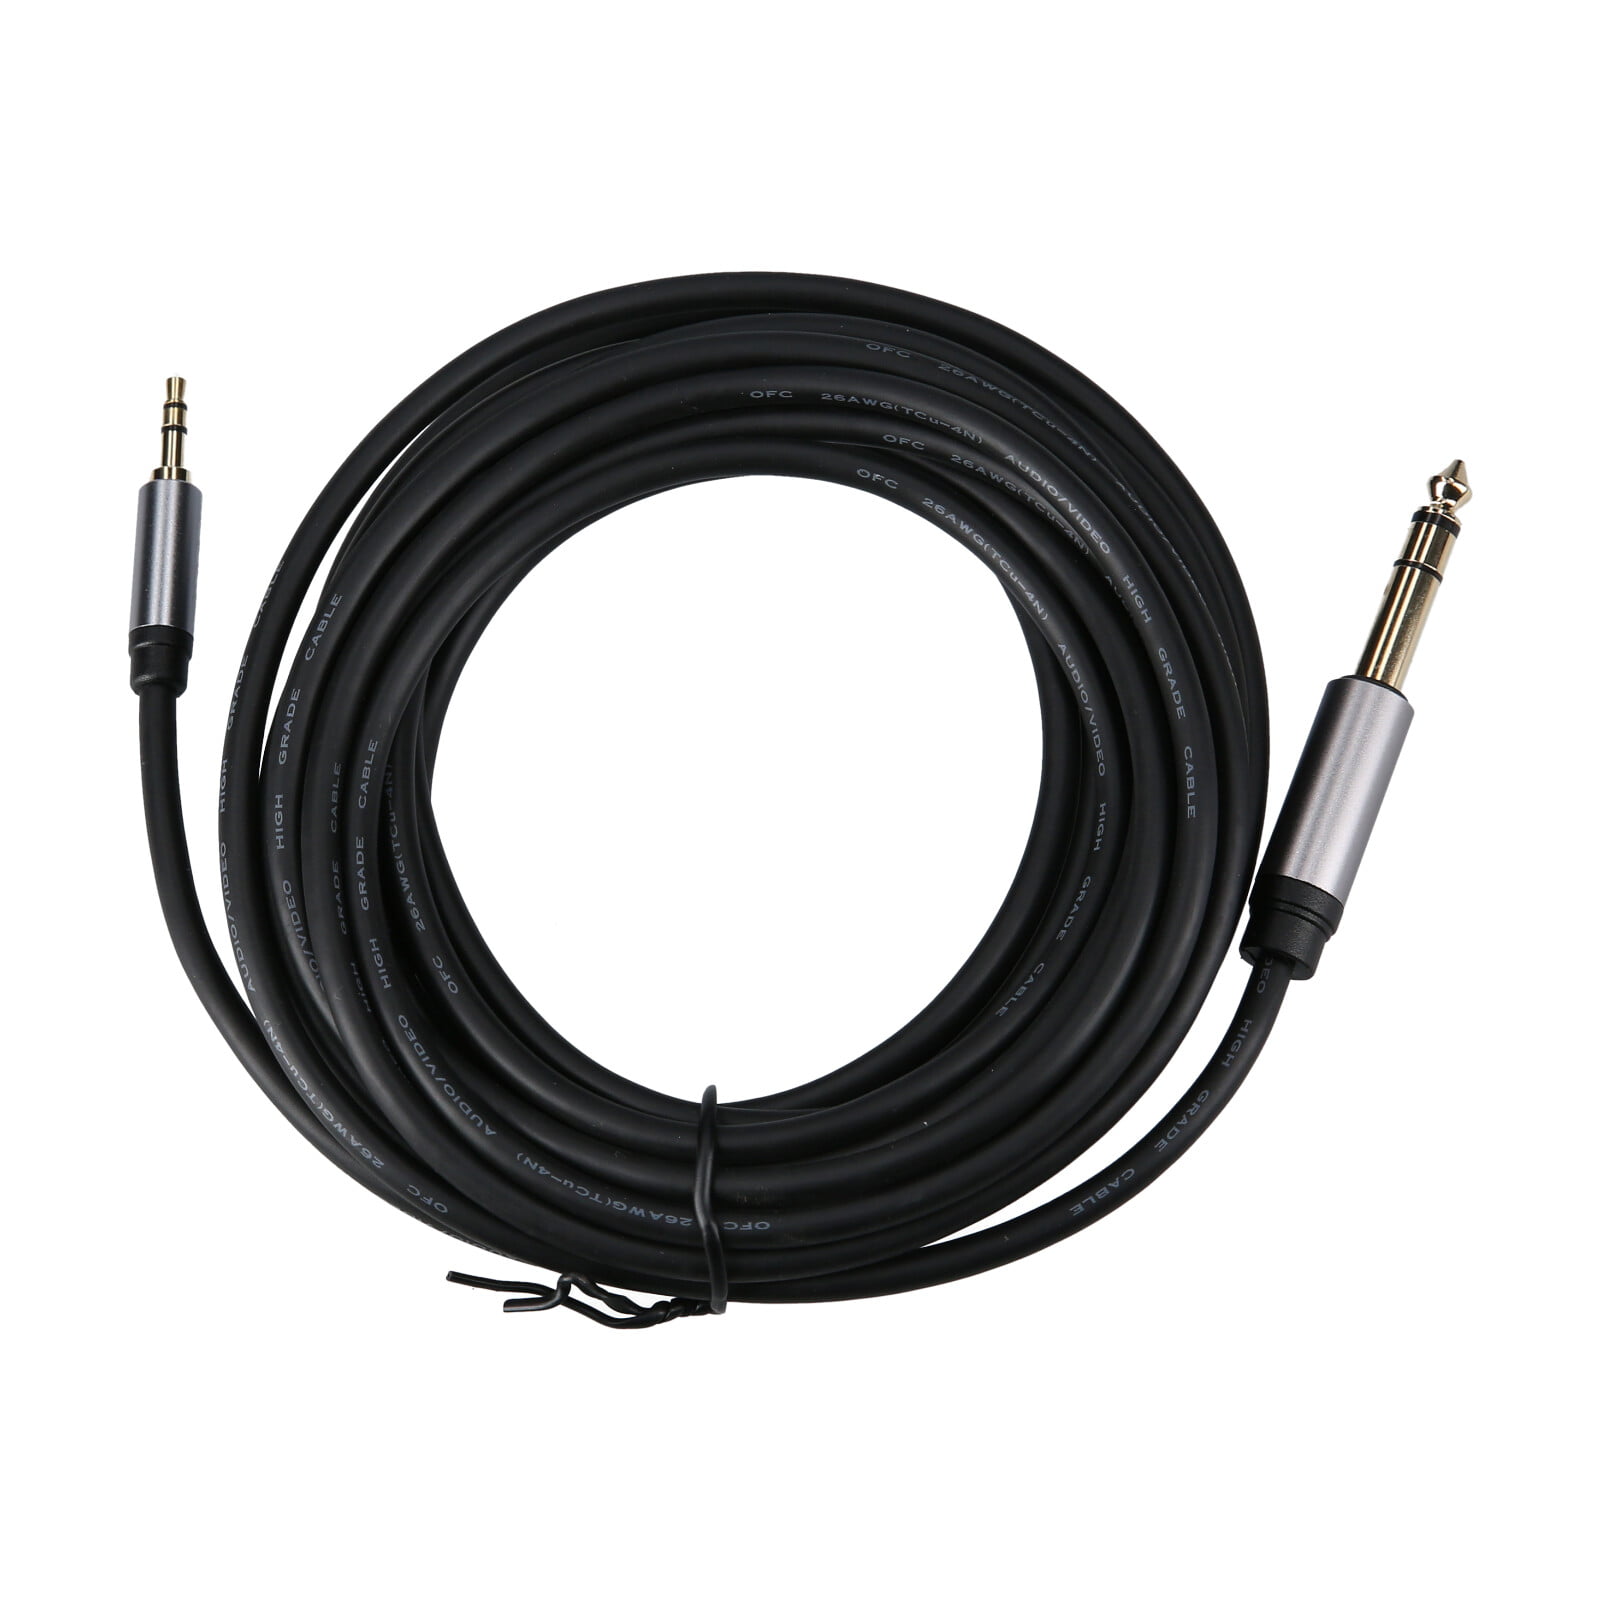 Andoer 2m/ 6.6ft XLR Cable Right Angle Male to Right Angle Female Plug for Microphone Mixer Mixing Console Loudspeaker 